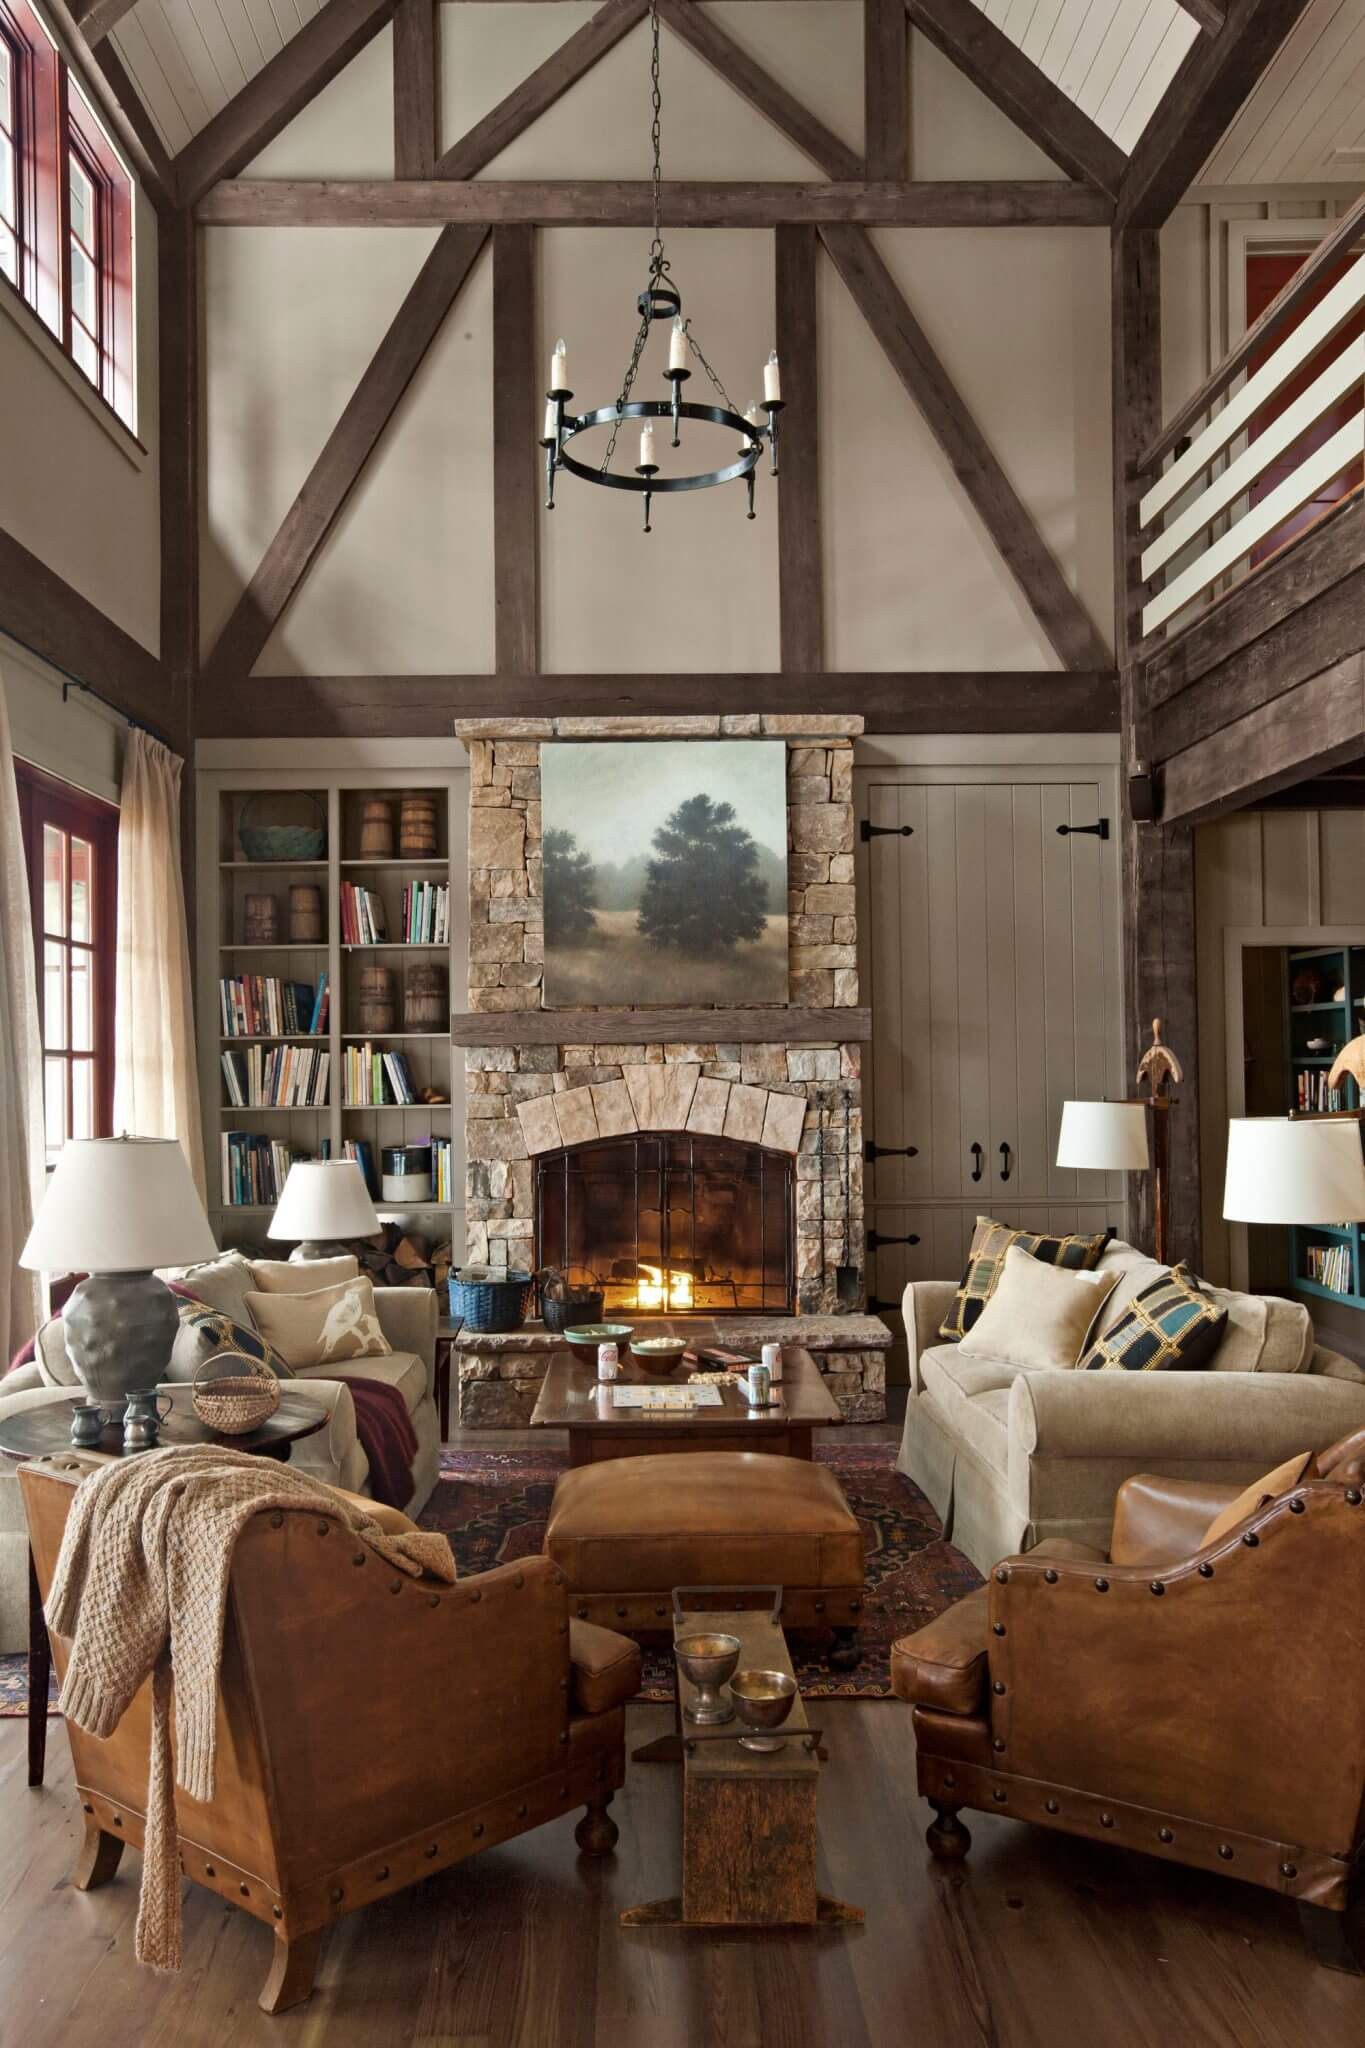 Country Living Room Decor Ideas
 20 Best Classic Country Living Room Decor